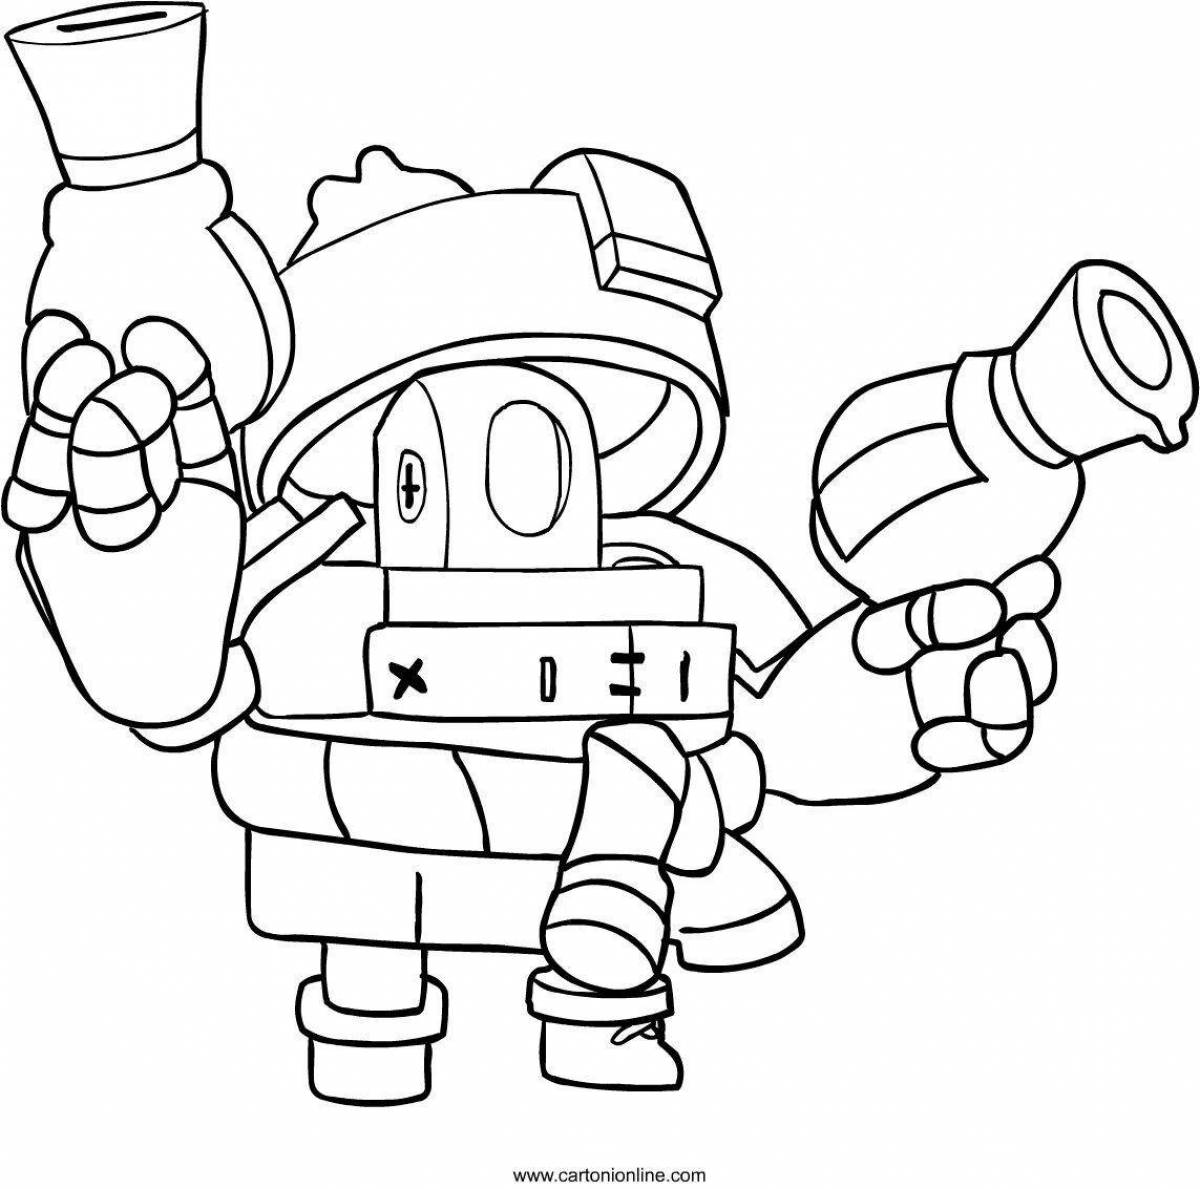 Attractive brawl stars skin coloring pages